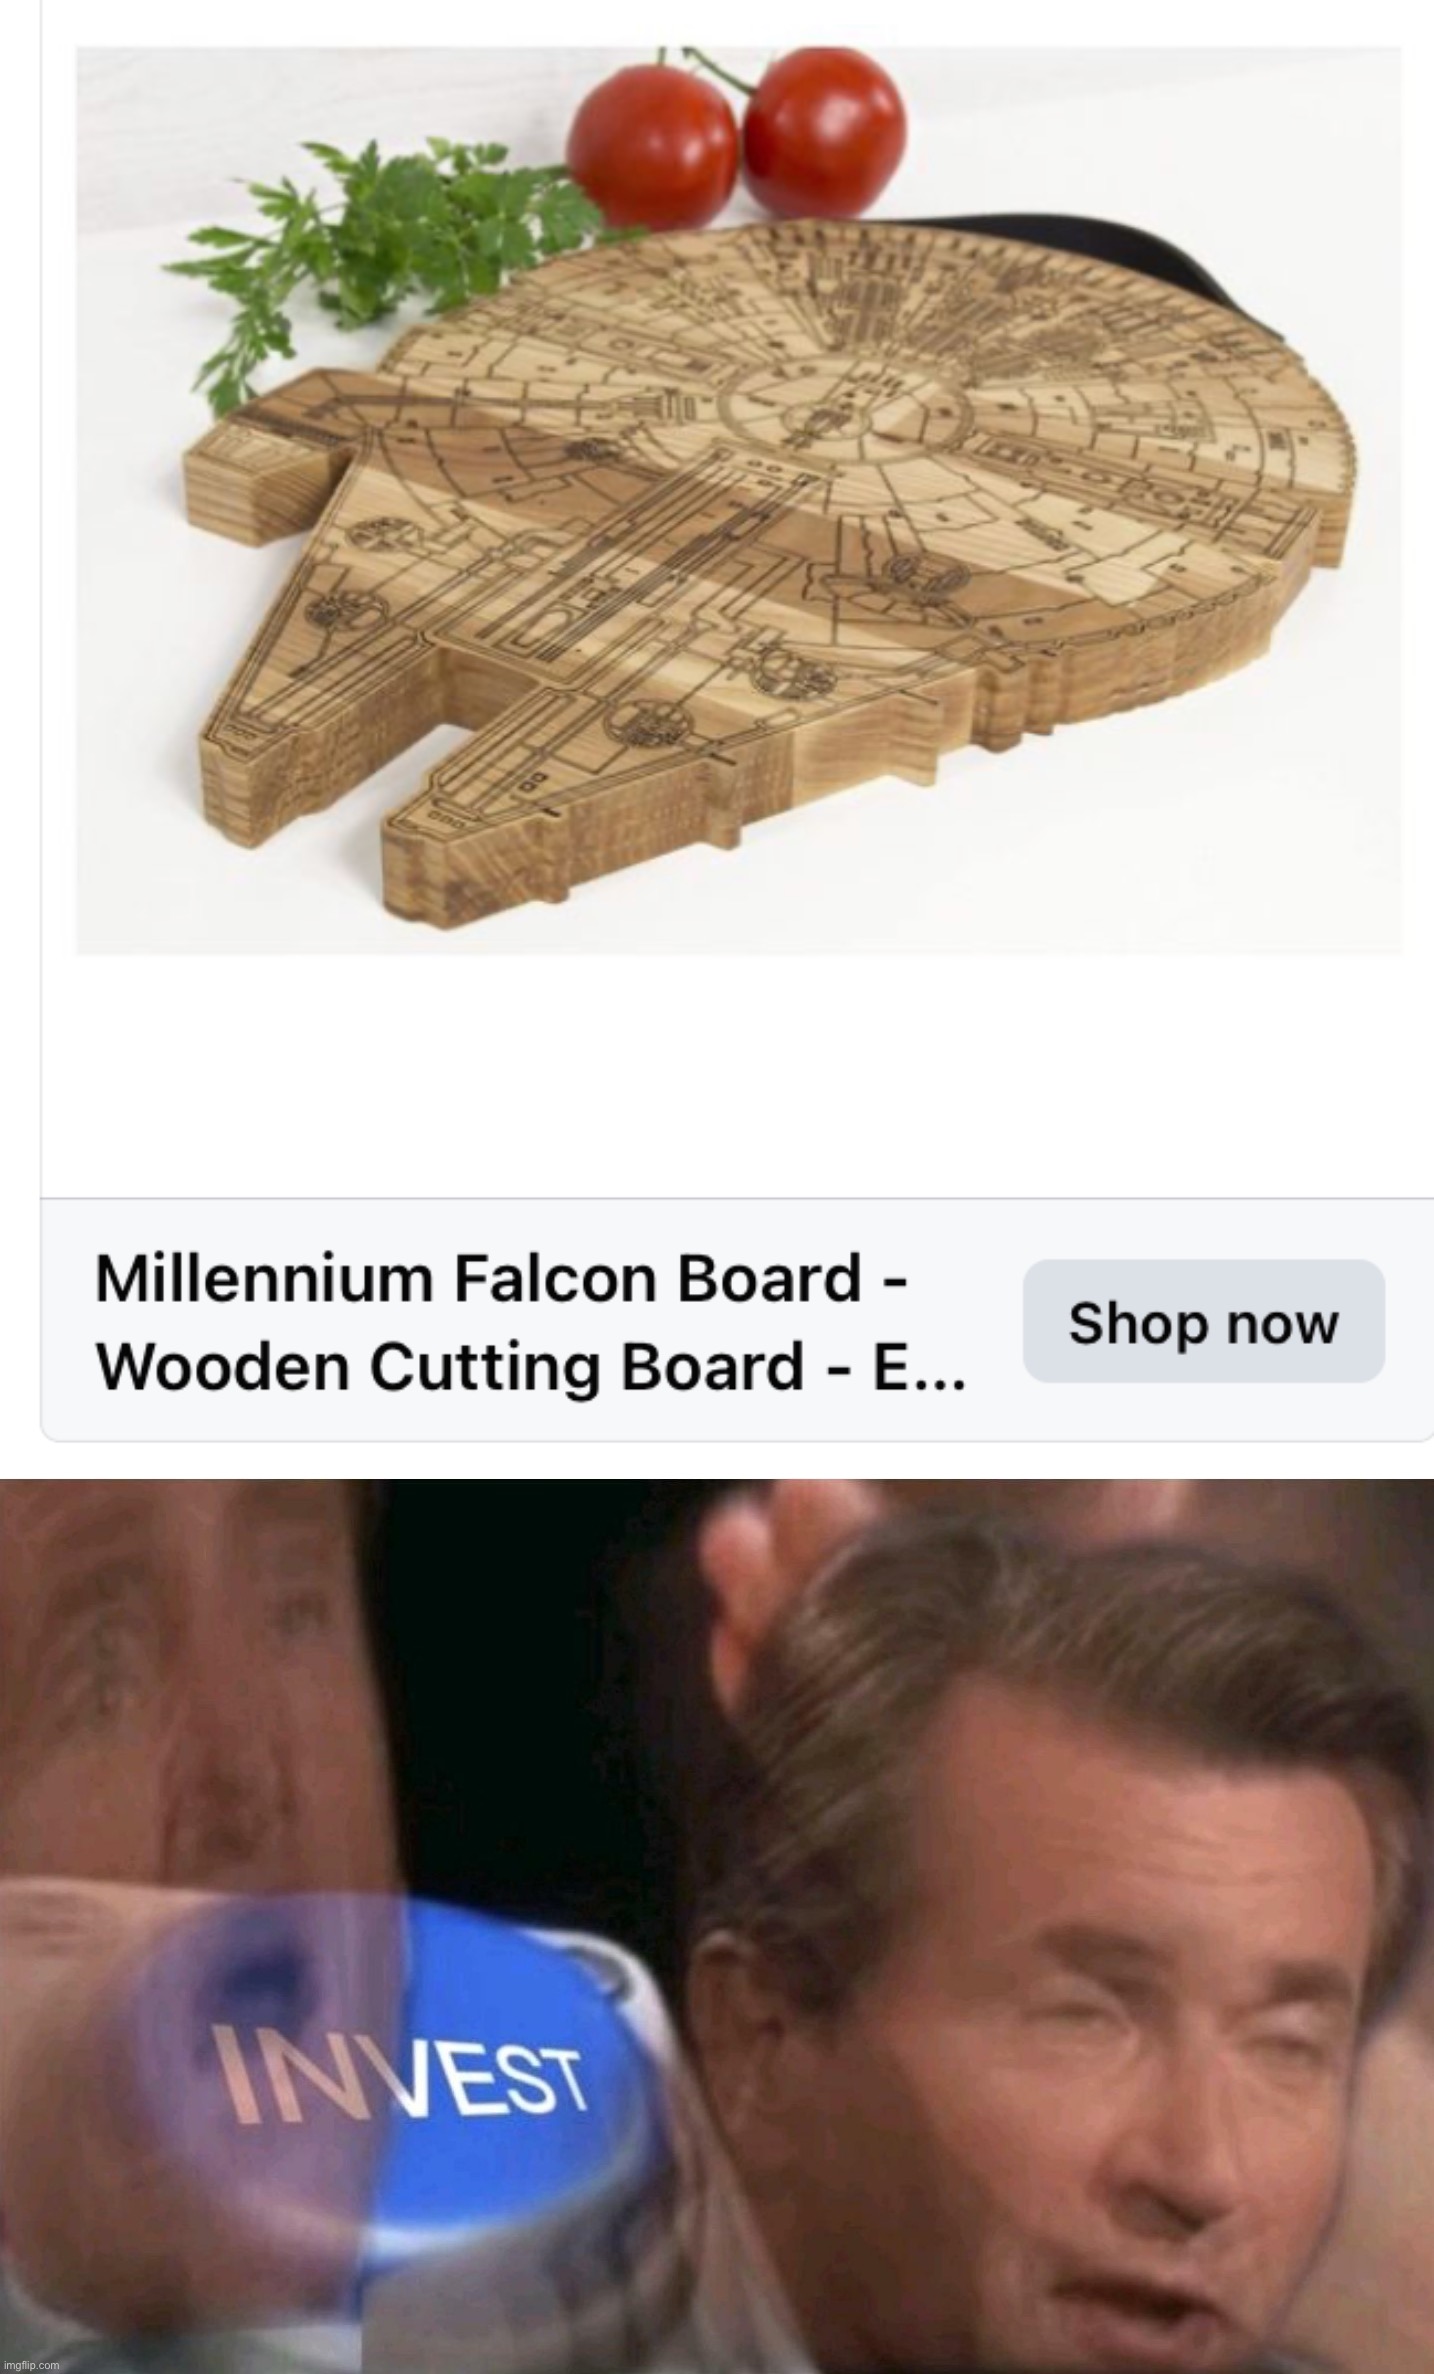 image tagged in millennium falcon cutting board,invest | made w/ Imgflip meme maker